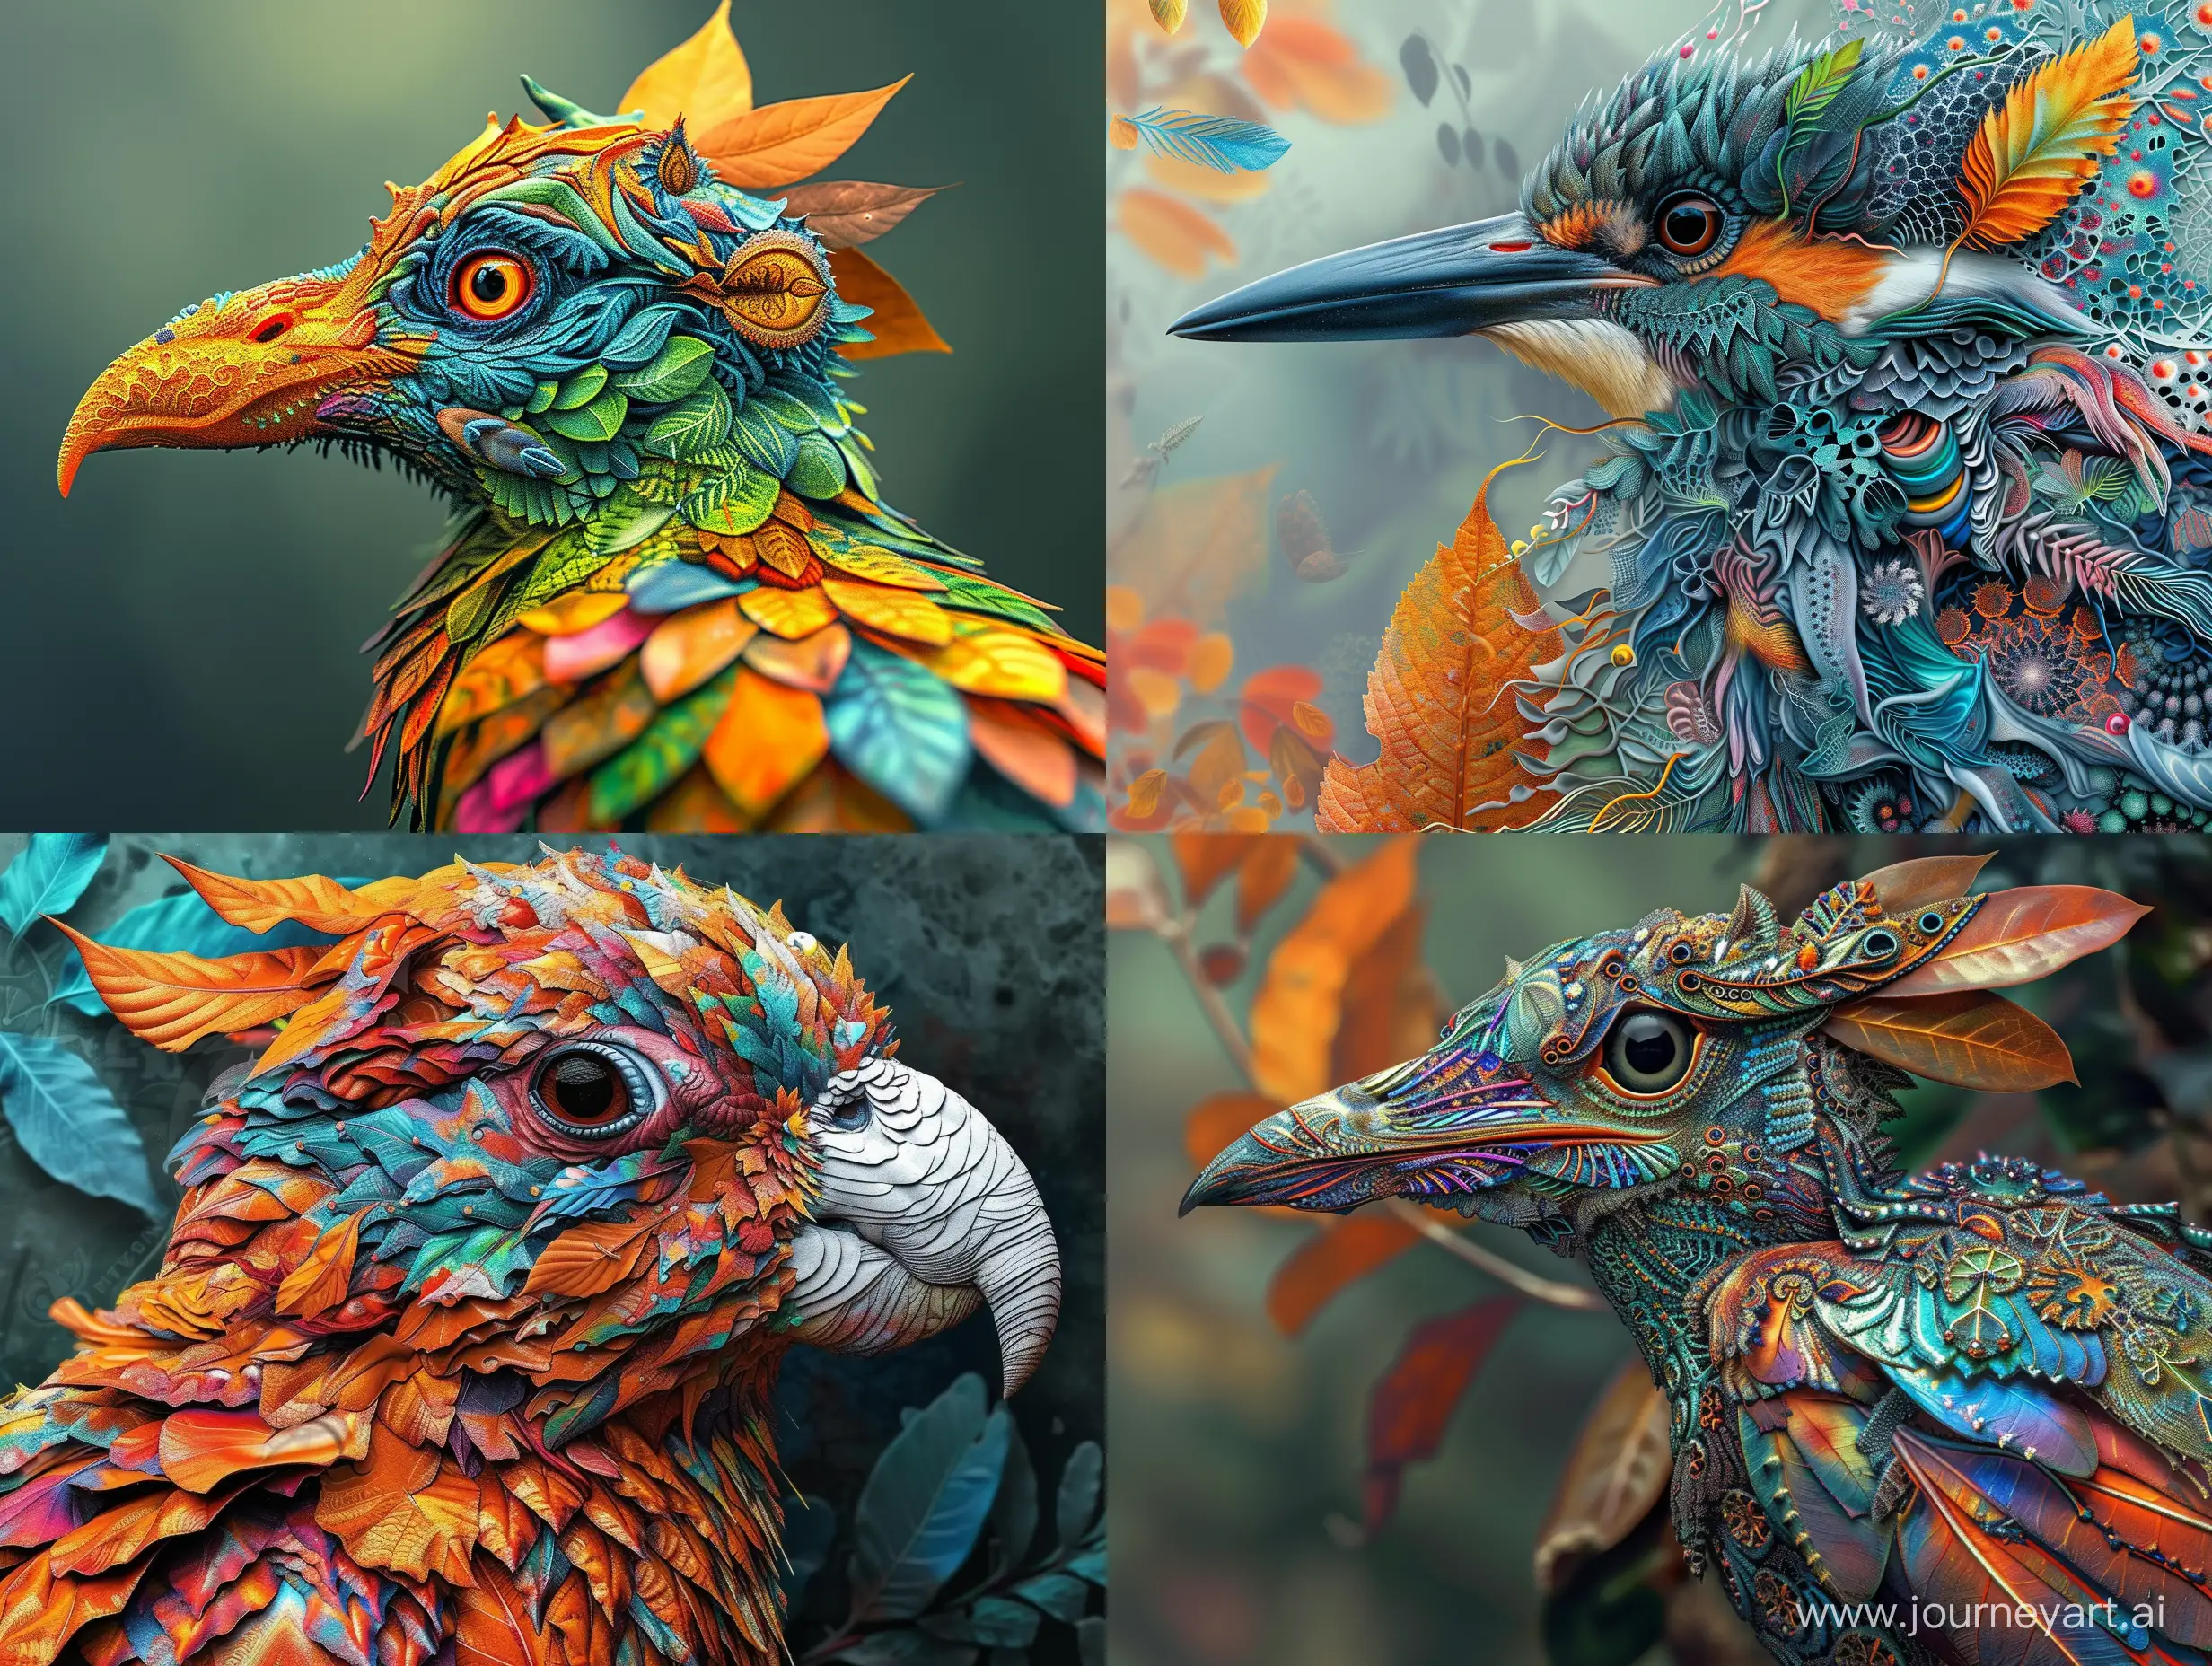  Hyper realistic portrait of a unique beautiful bird wearing intricately detail multicolored fractal art, painting Canvas Poster, leaf, animals, interwoven in abstract shapes